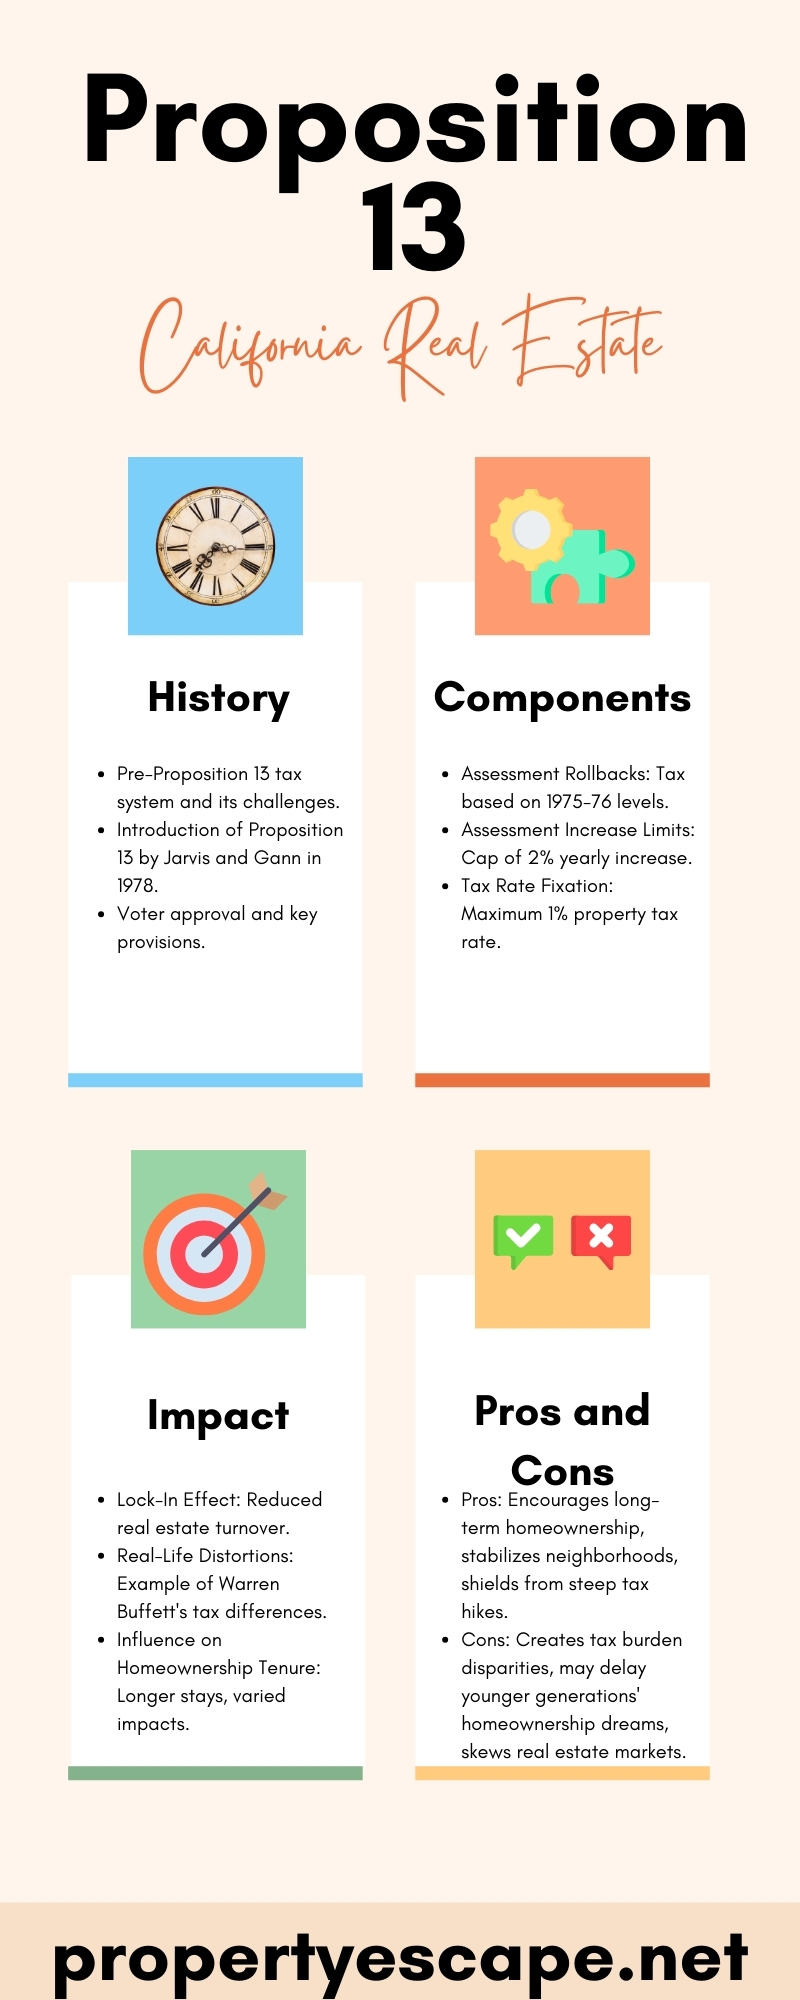 Proposition 13 and California Real Estate Infographic